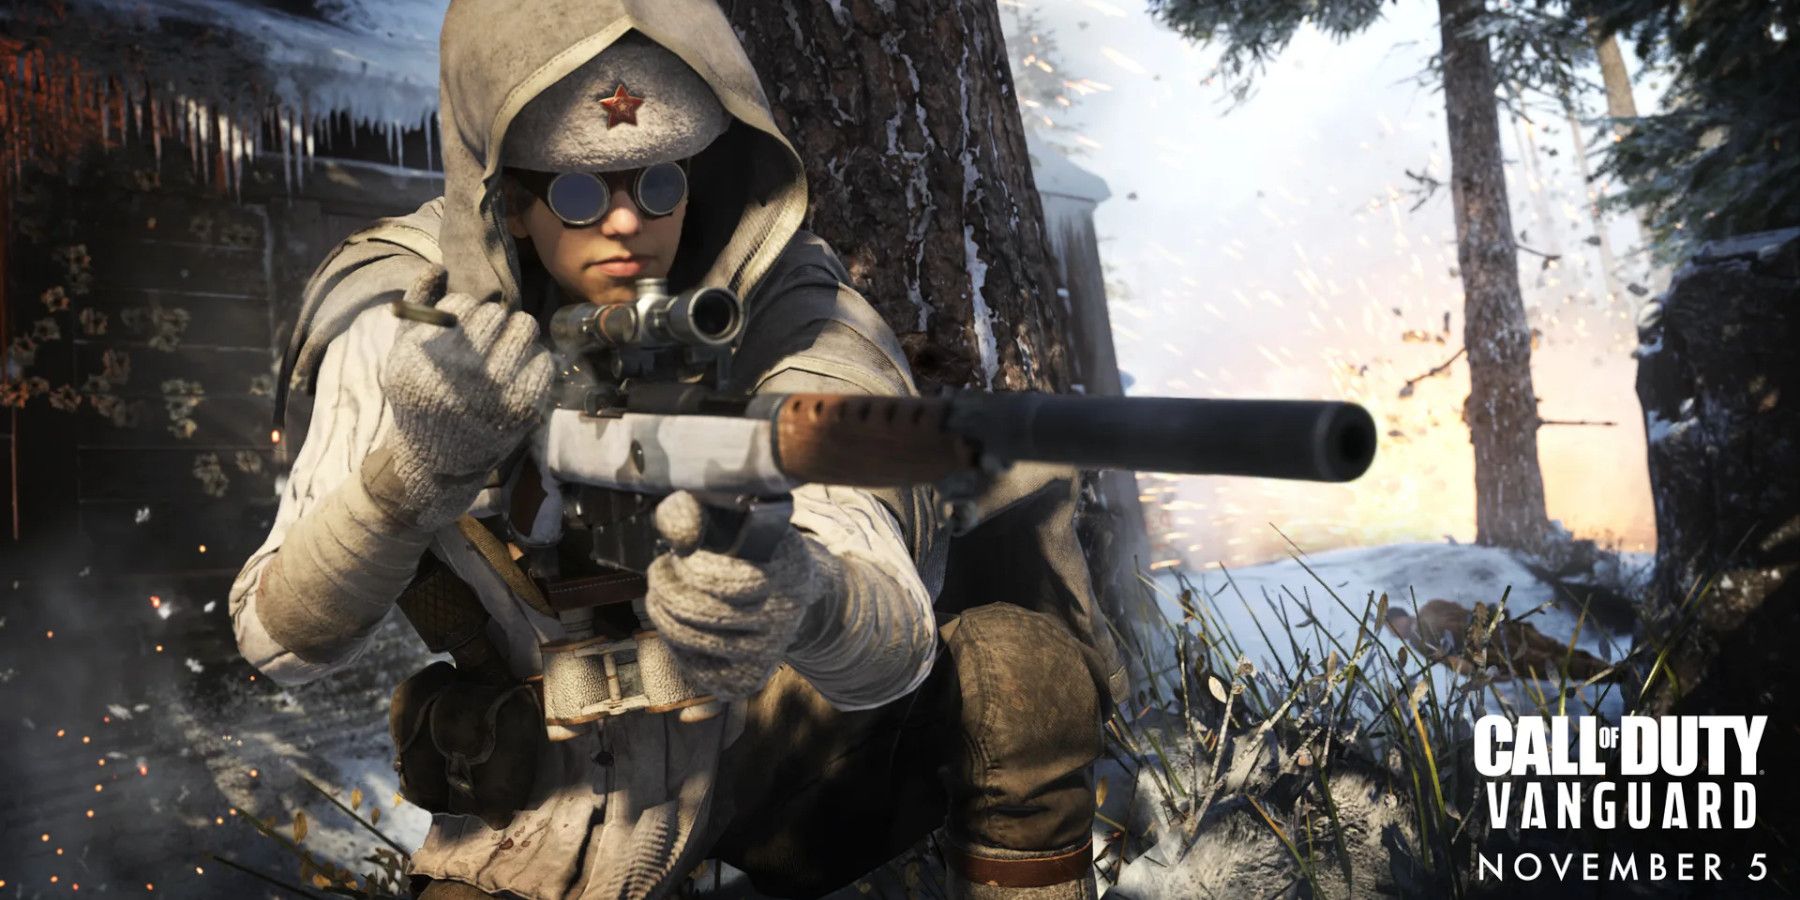 call-of-duty-vanguard-promotional-image-snow-sniper